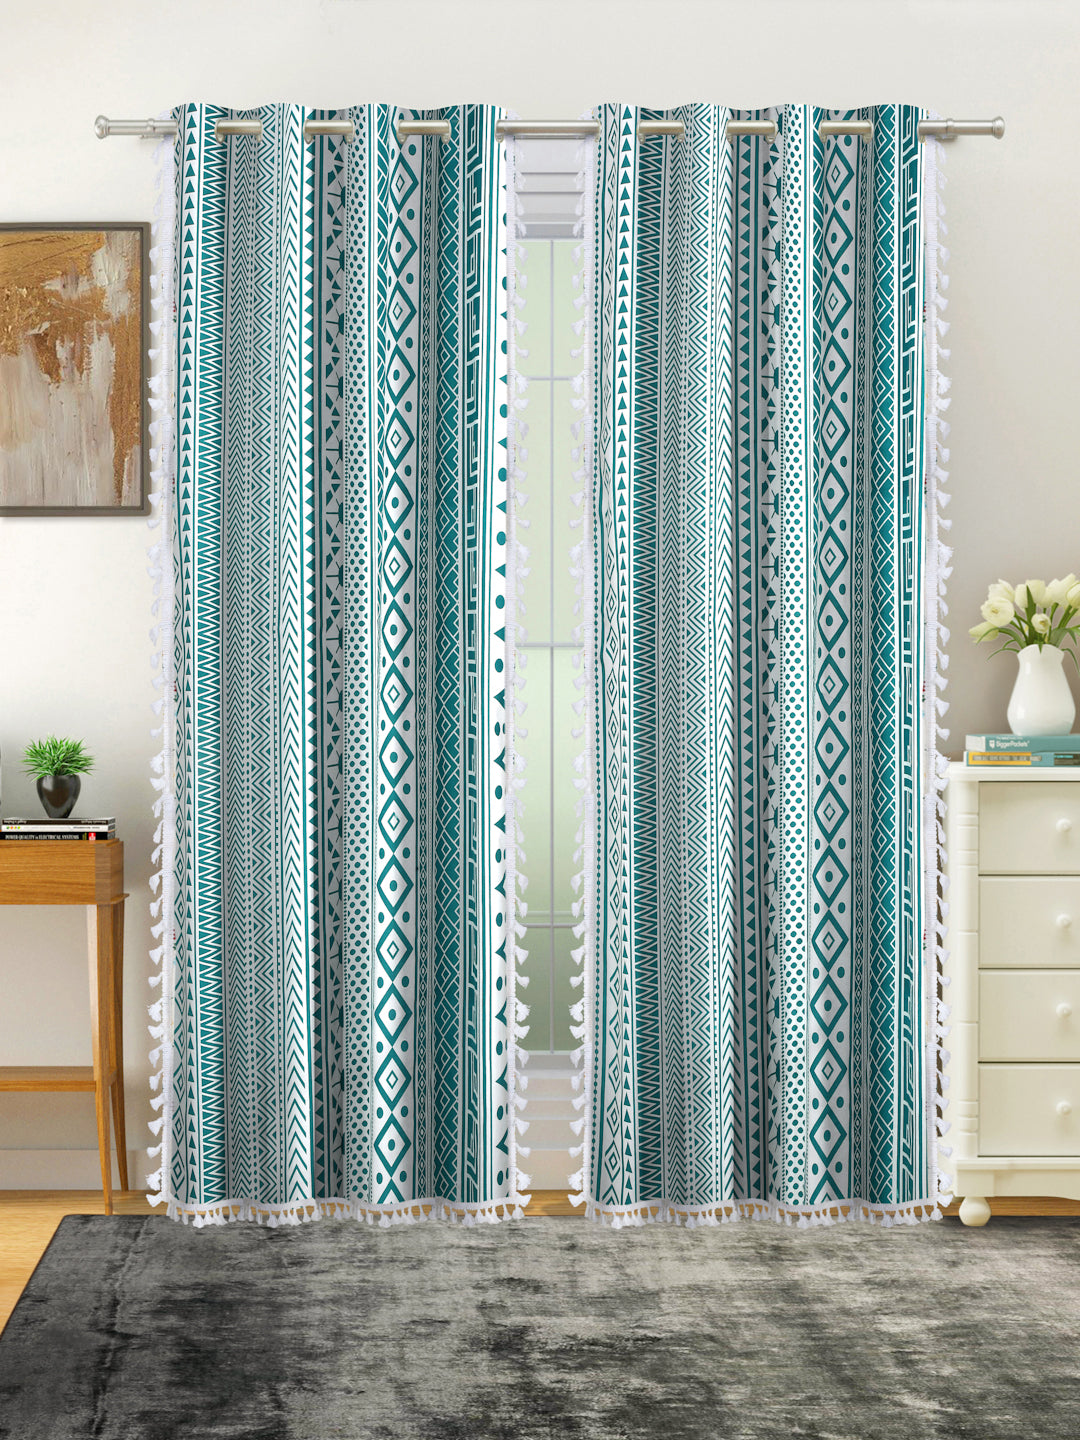 Cotton Printed Boho Light Filtering Door Curtain with Lace- Teal (Pack of 2)